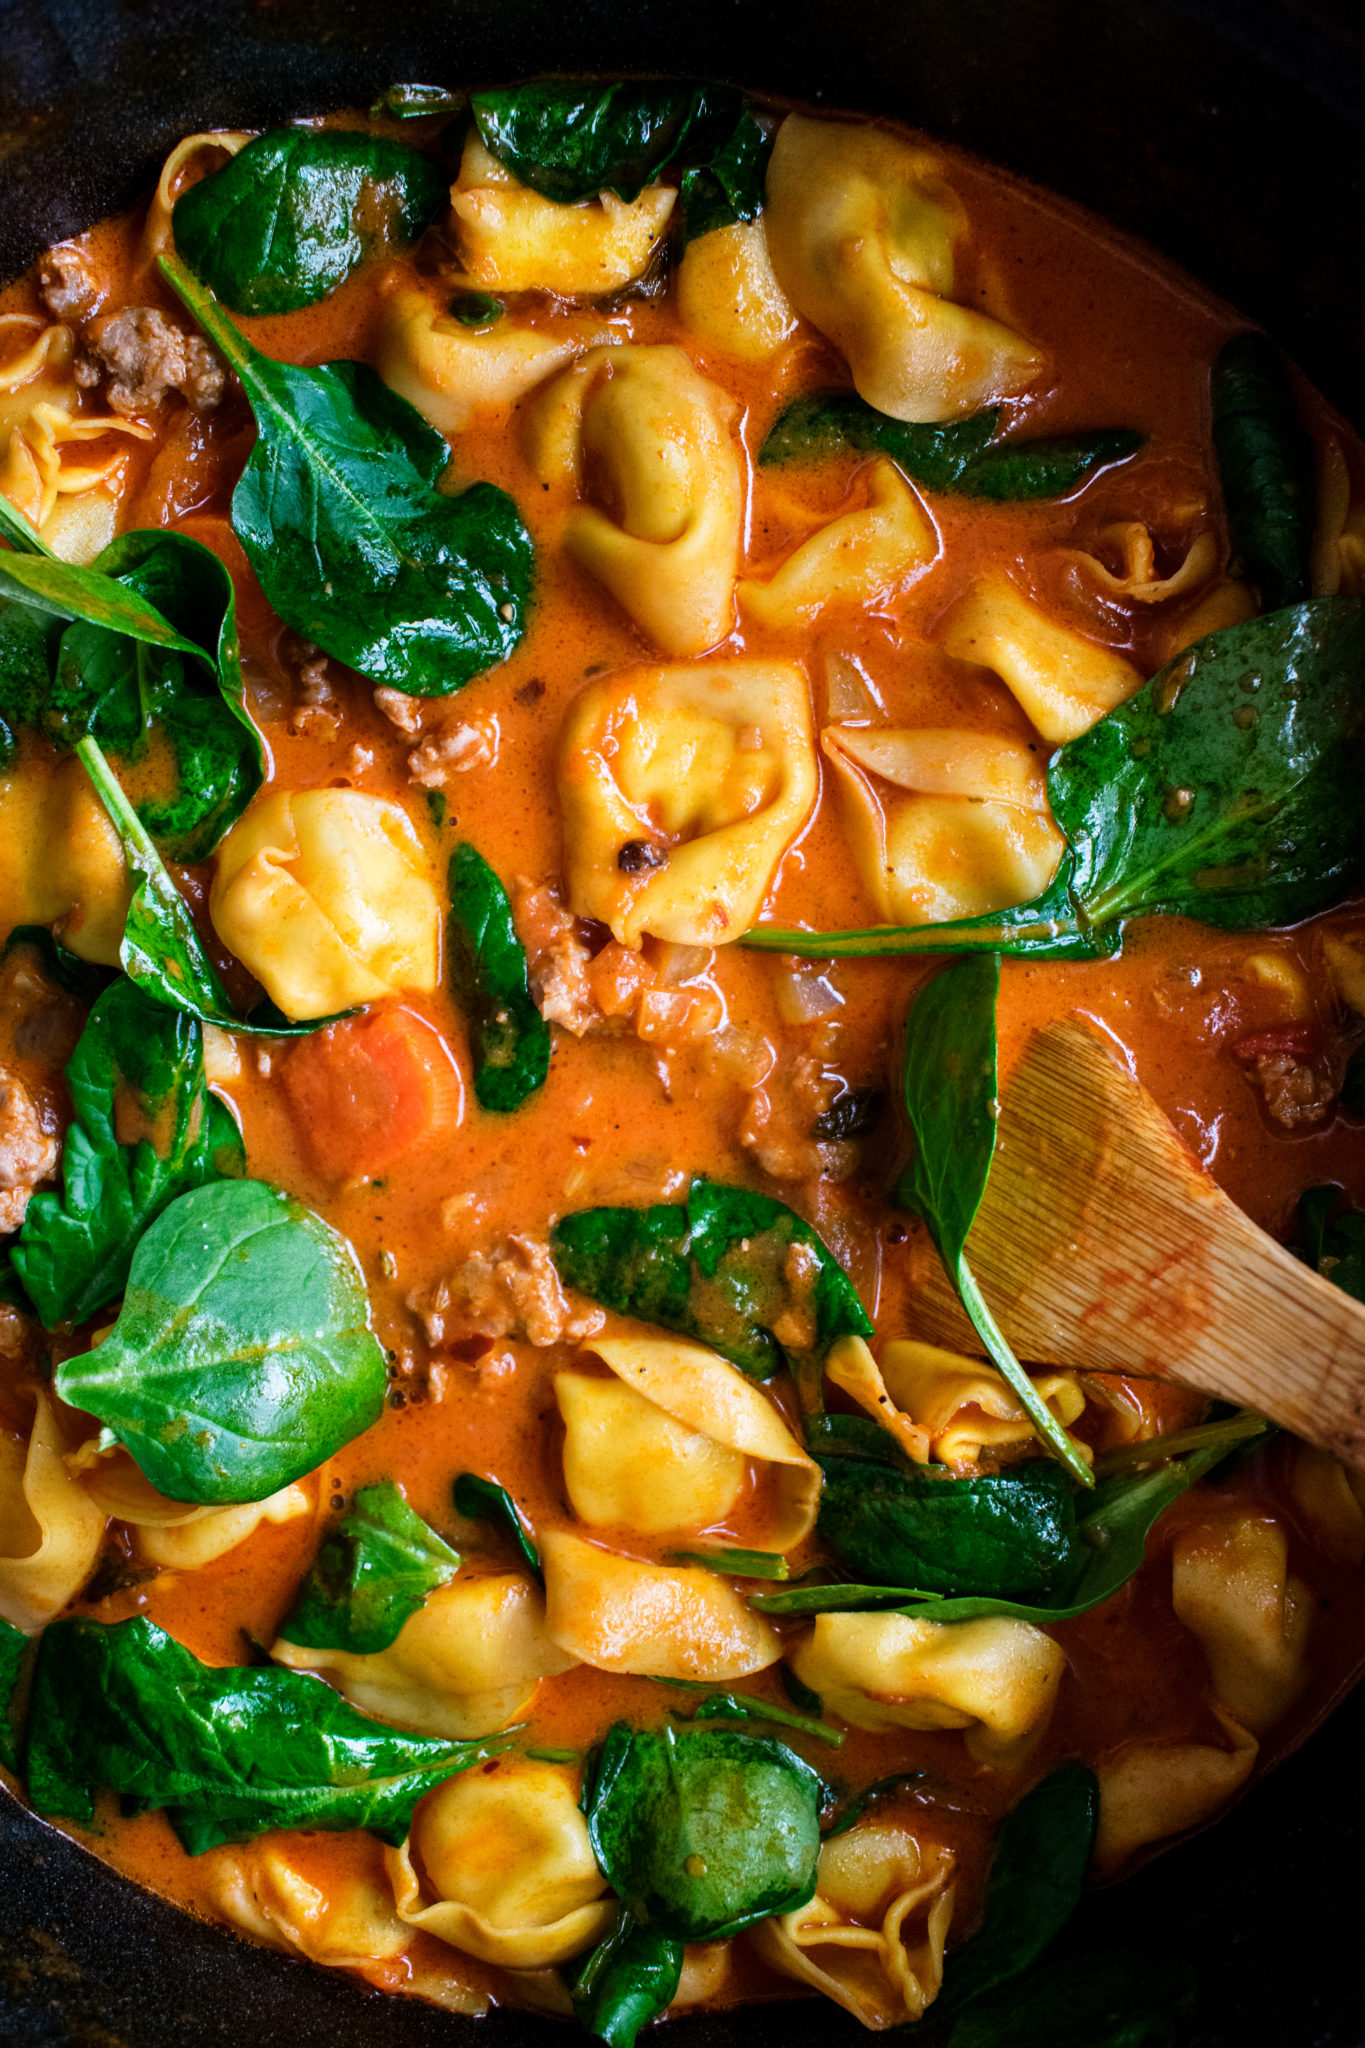 Creamy Tortellini Soup with Sausage &amp; Spinach - The Original Dish